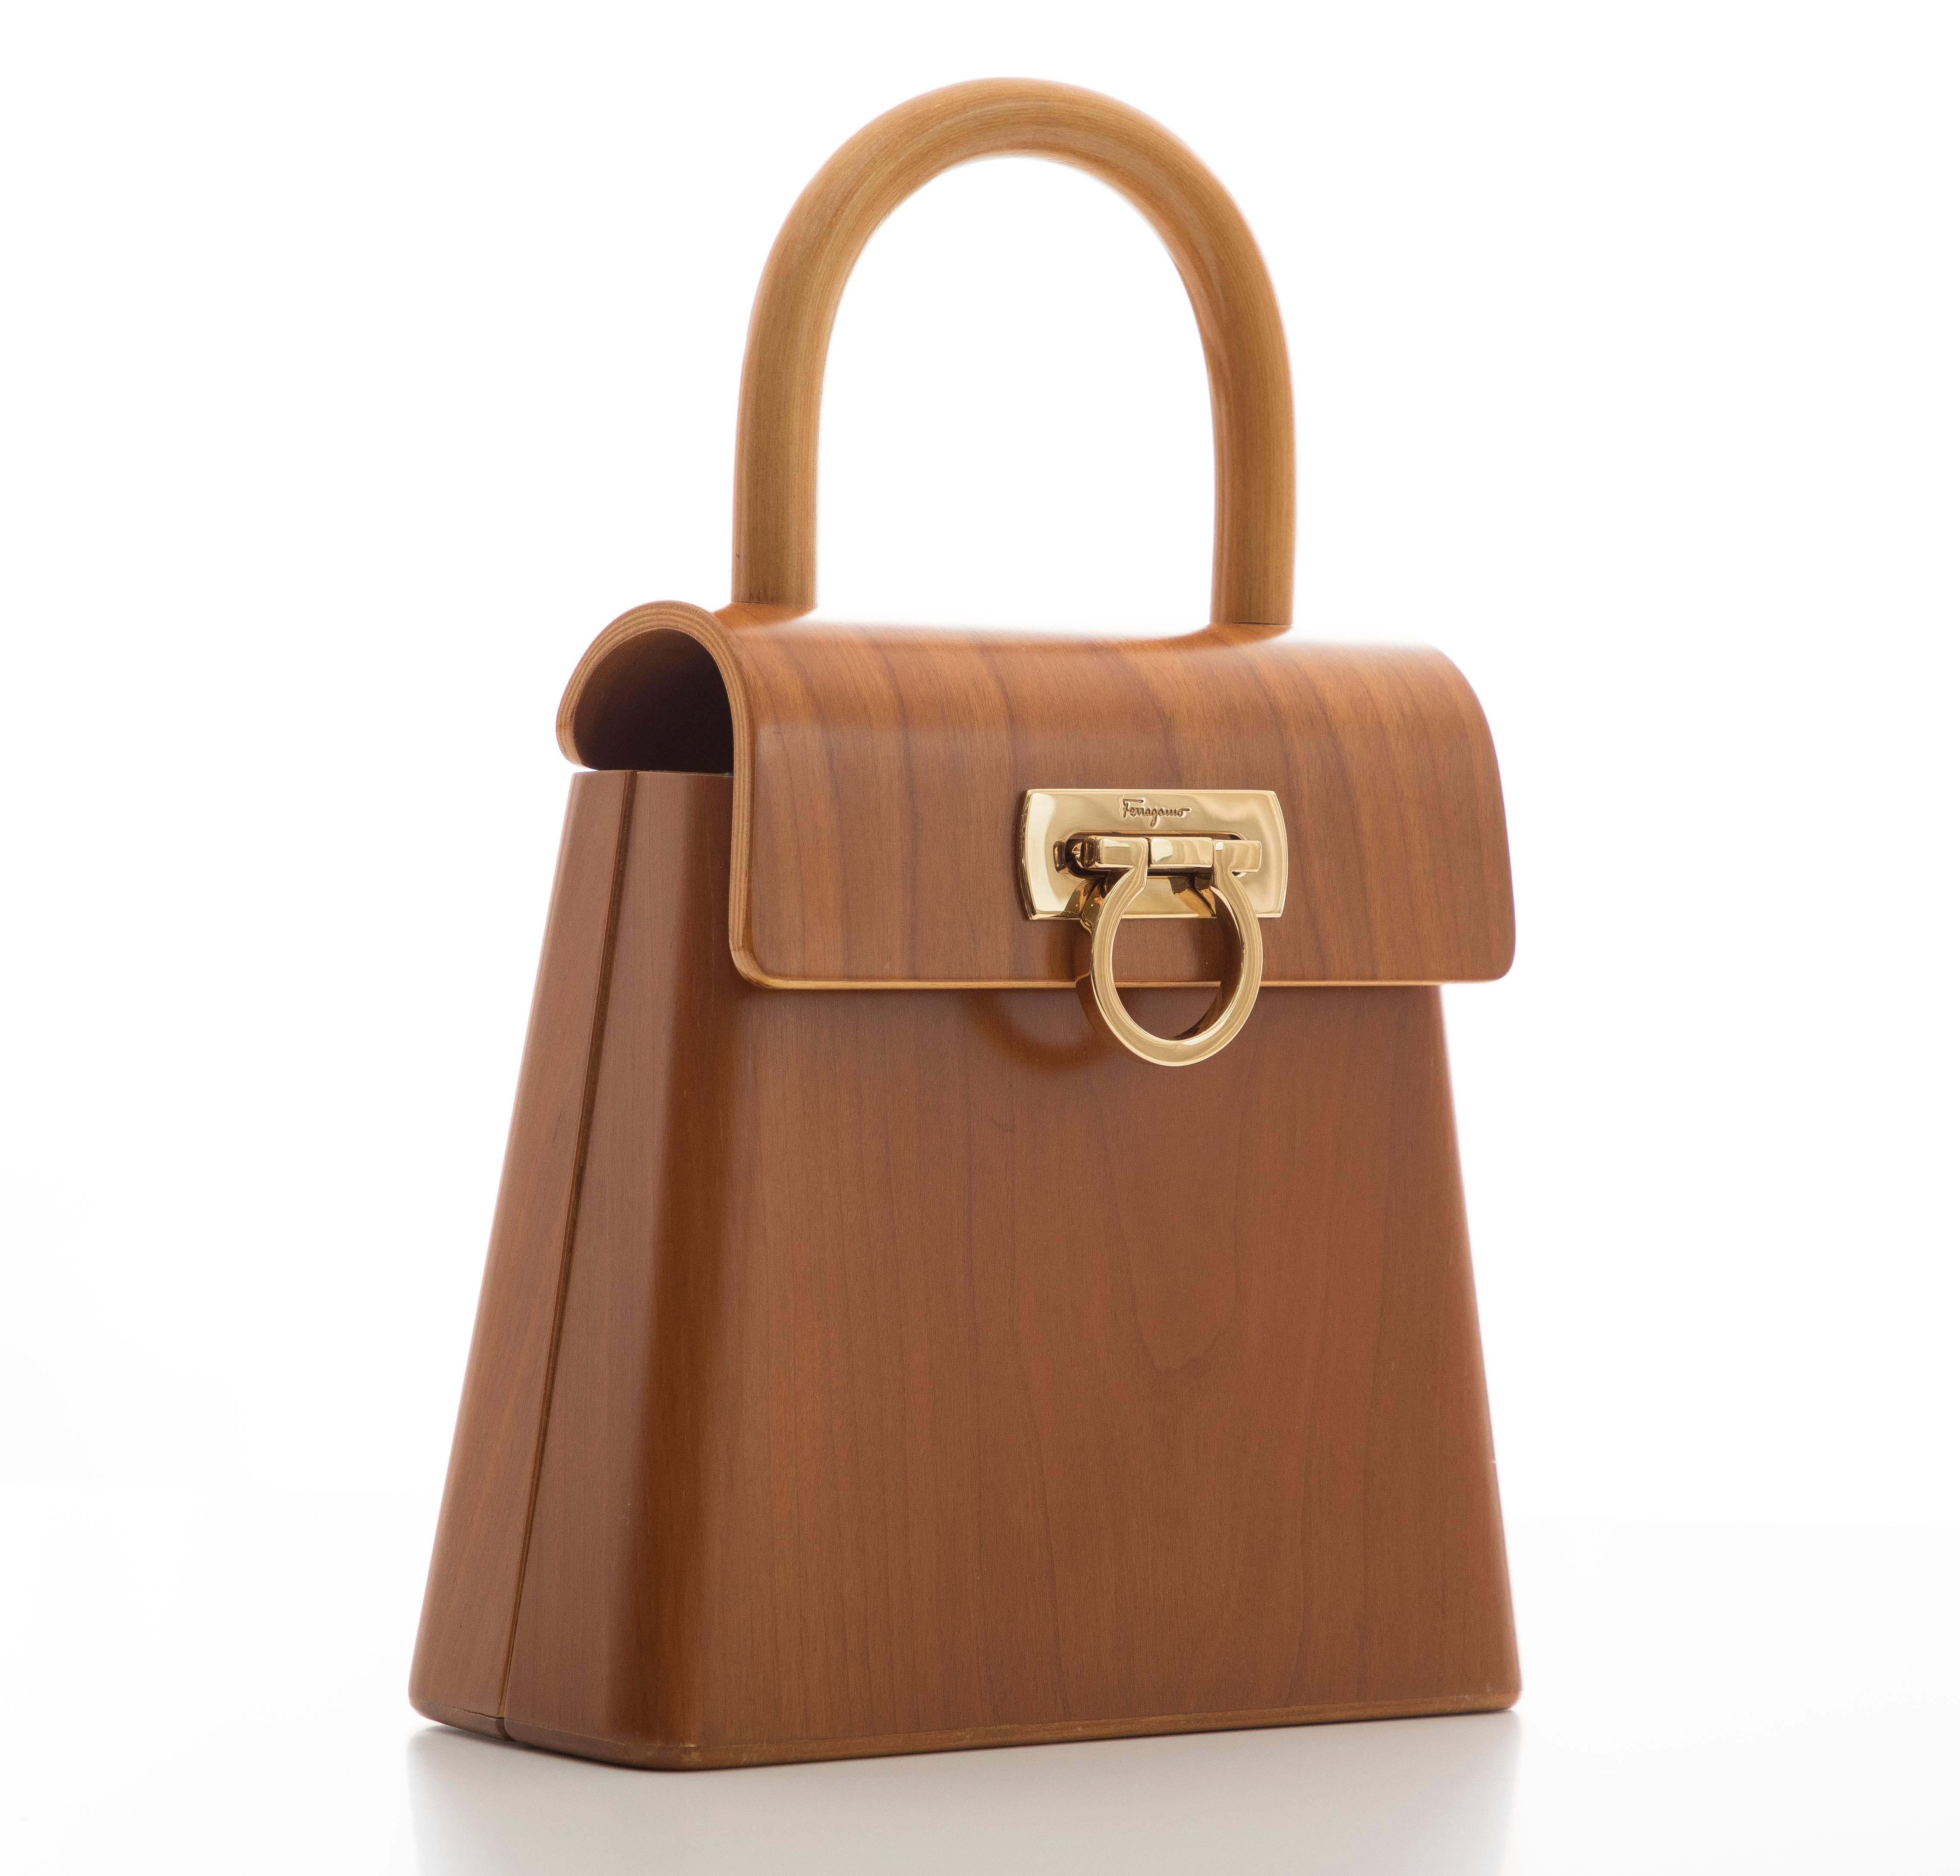 Salvatore Ferragamo, Circa: 1997-1998 top handle marrone cherry wood handbag with gold-tone gancini clasp, fold over and hinged magnetic top opening, one slot pocket and lined in black jacquard fabric. Serial Number: AU-21-7728

8.5